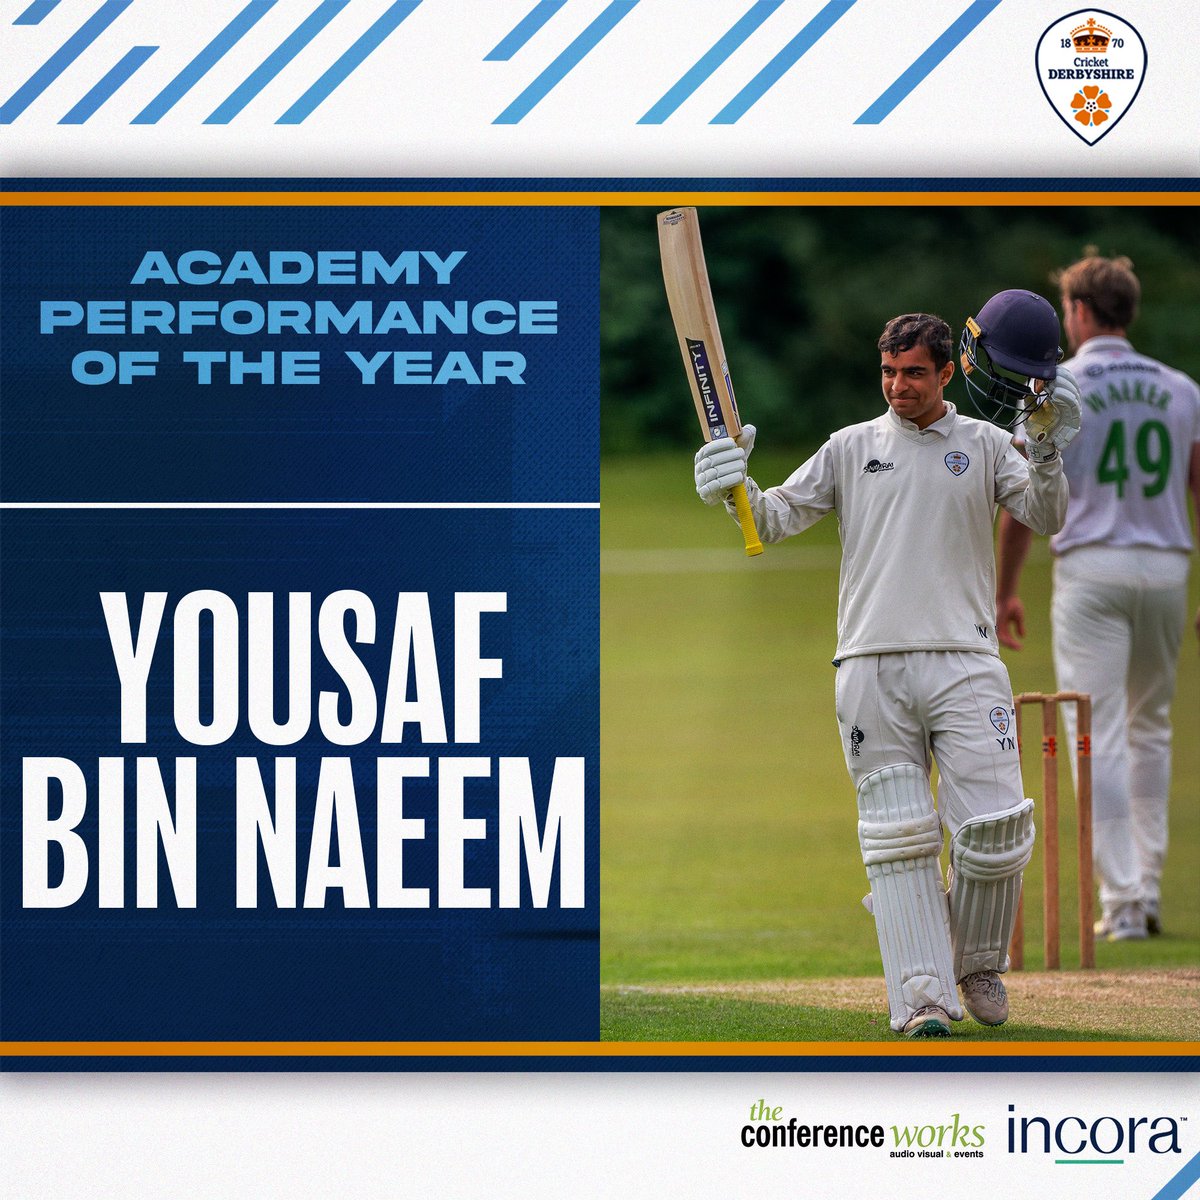 The 2023 Chris Warne Shield for Academy Performance of the Year is awarded to 𝐘𝐨𝐮𝐬𝐚𝐟 𝐁𝐢𝐧 𝐍𝐚𝐞𝐞𝐦 for his brilliant maiden Second XI Championship century, aged just 17-year-old! 🏆 #WeAreDerbyshire #OneClubOurCounty